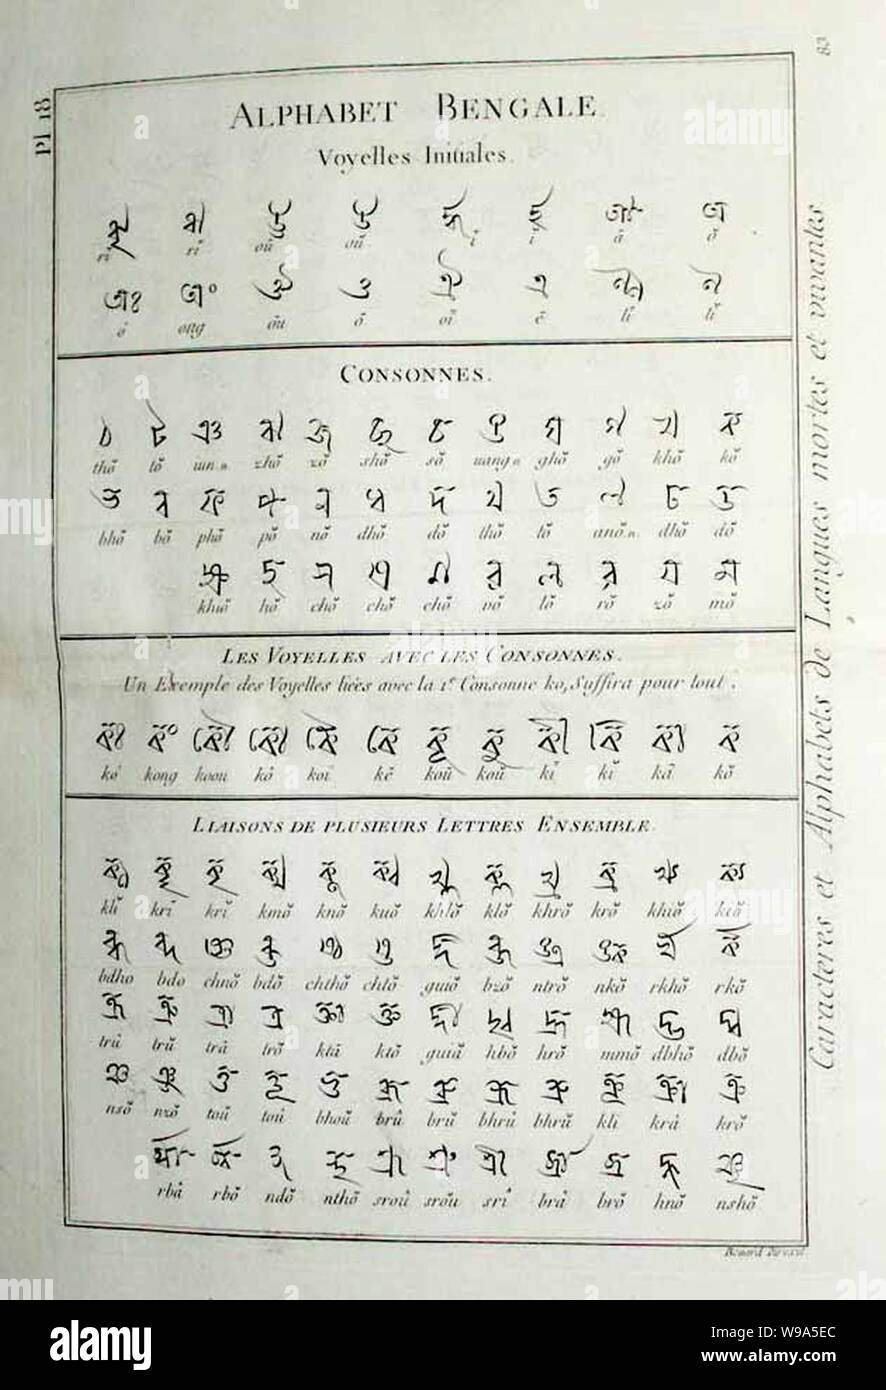 Diderot, the French Encyclopedist, included in his vast work this chart of the Bengali alphabet. Stock Photo